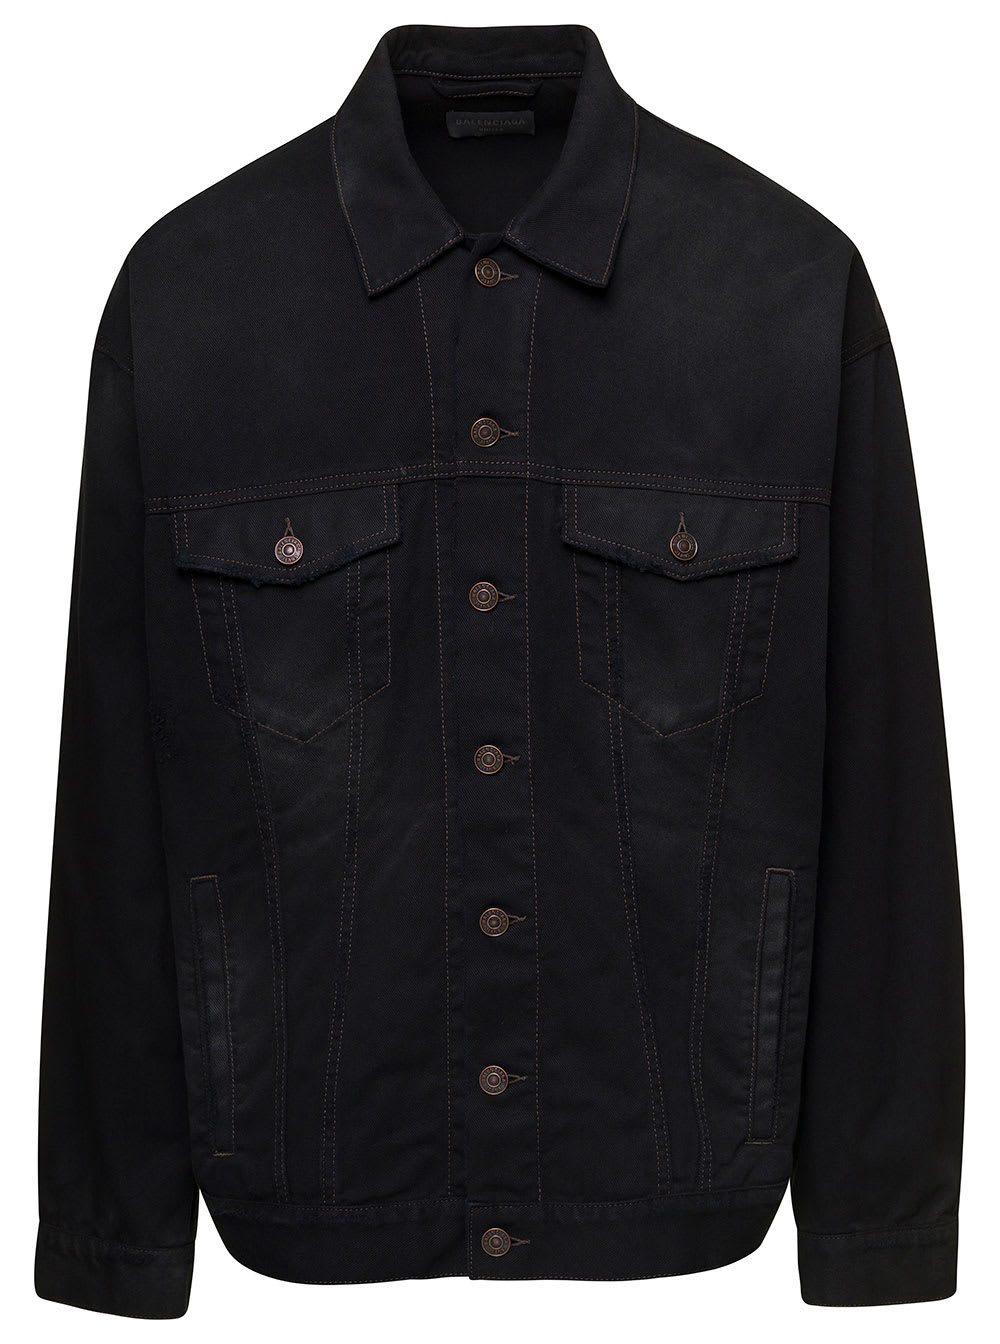 Balenciaga Oversized Black Jacket With Obscured Logo In Cotton Denim Man